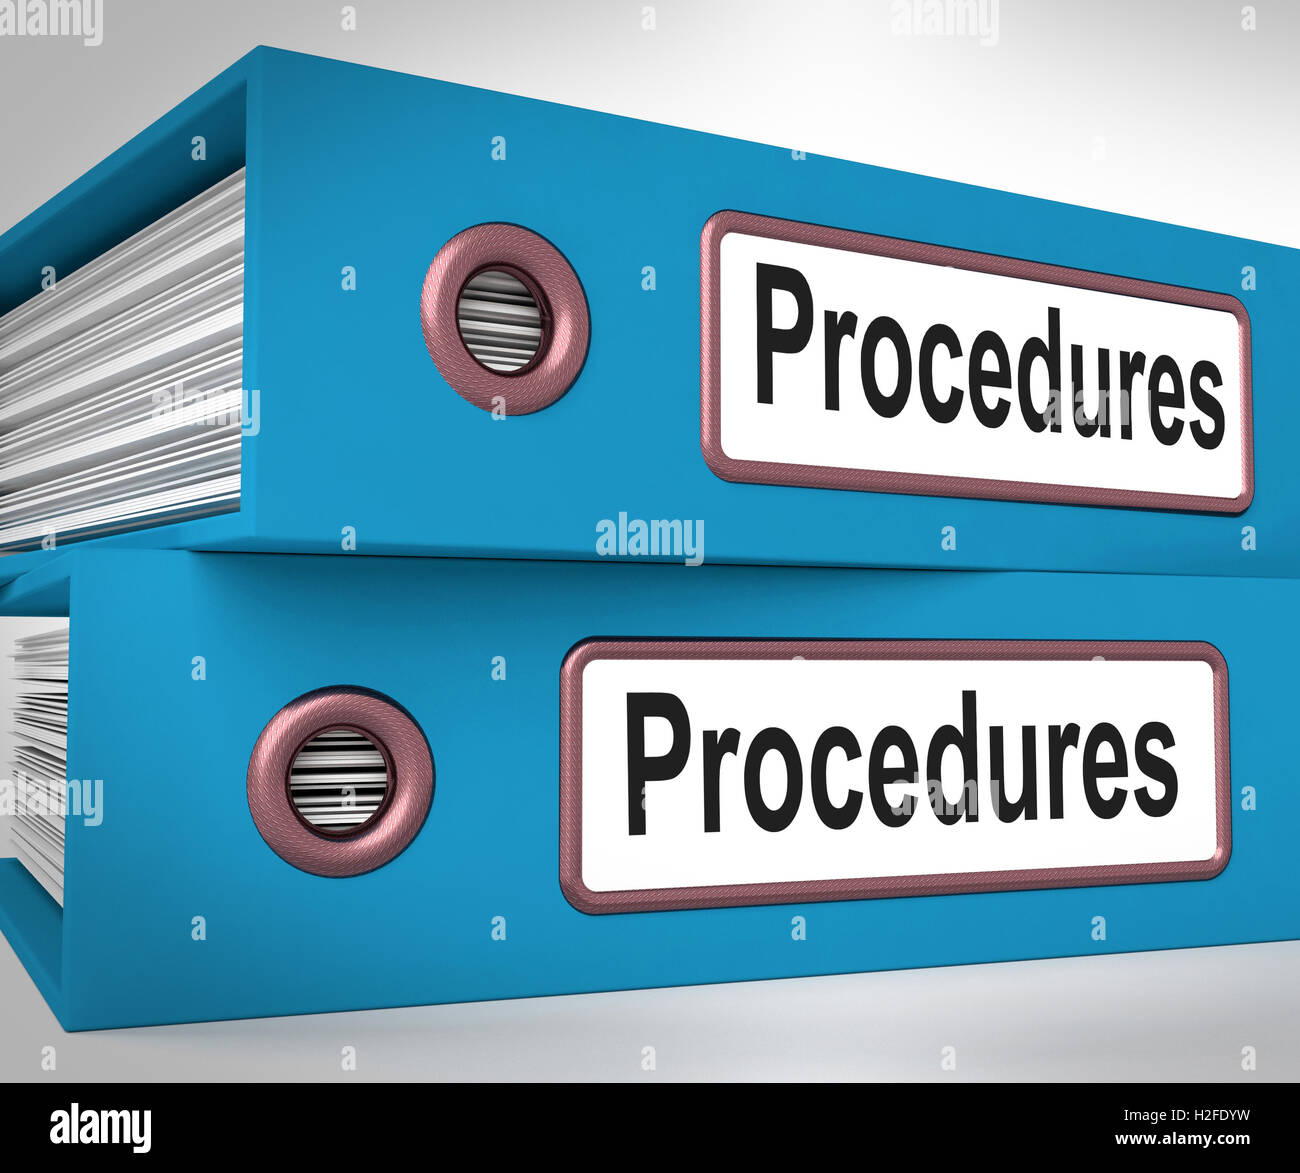 Procedures Folders Mean Correct Process And Best Practice Stock Photo